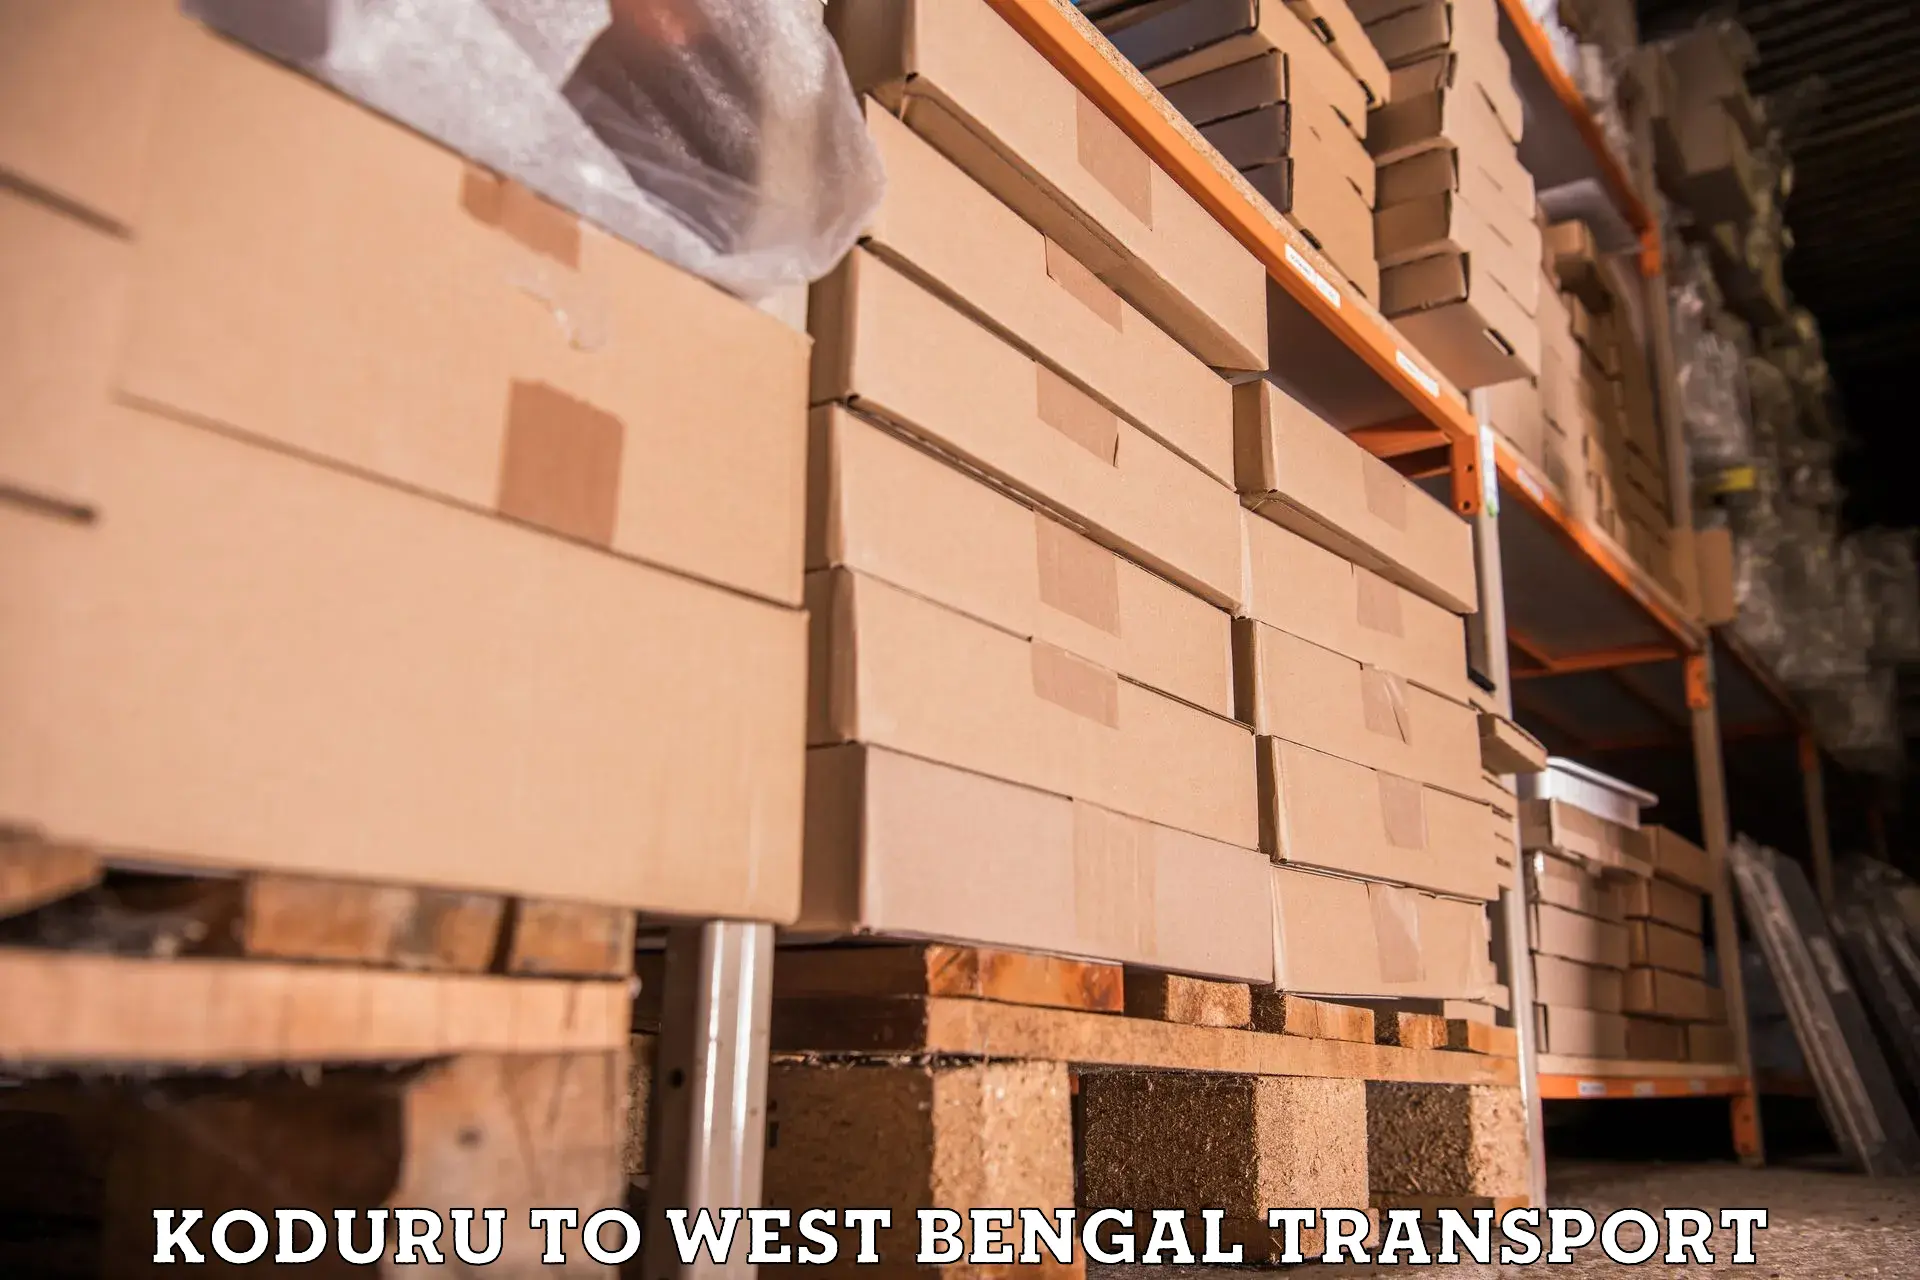 Air freight transport services in Koduru to West Bengal